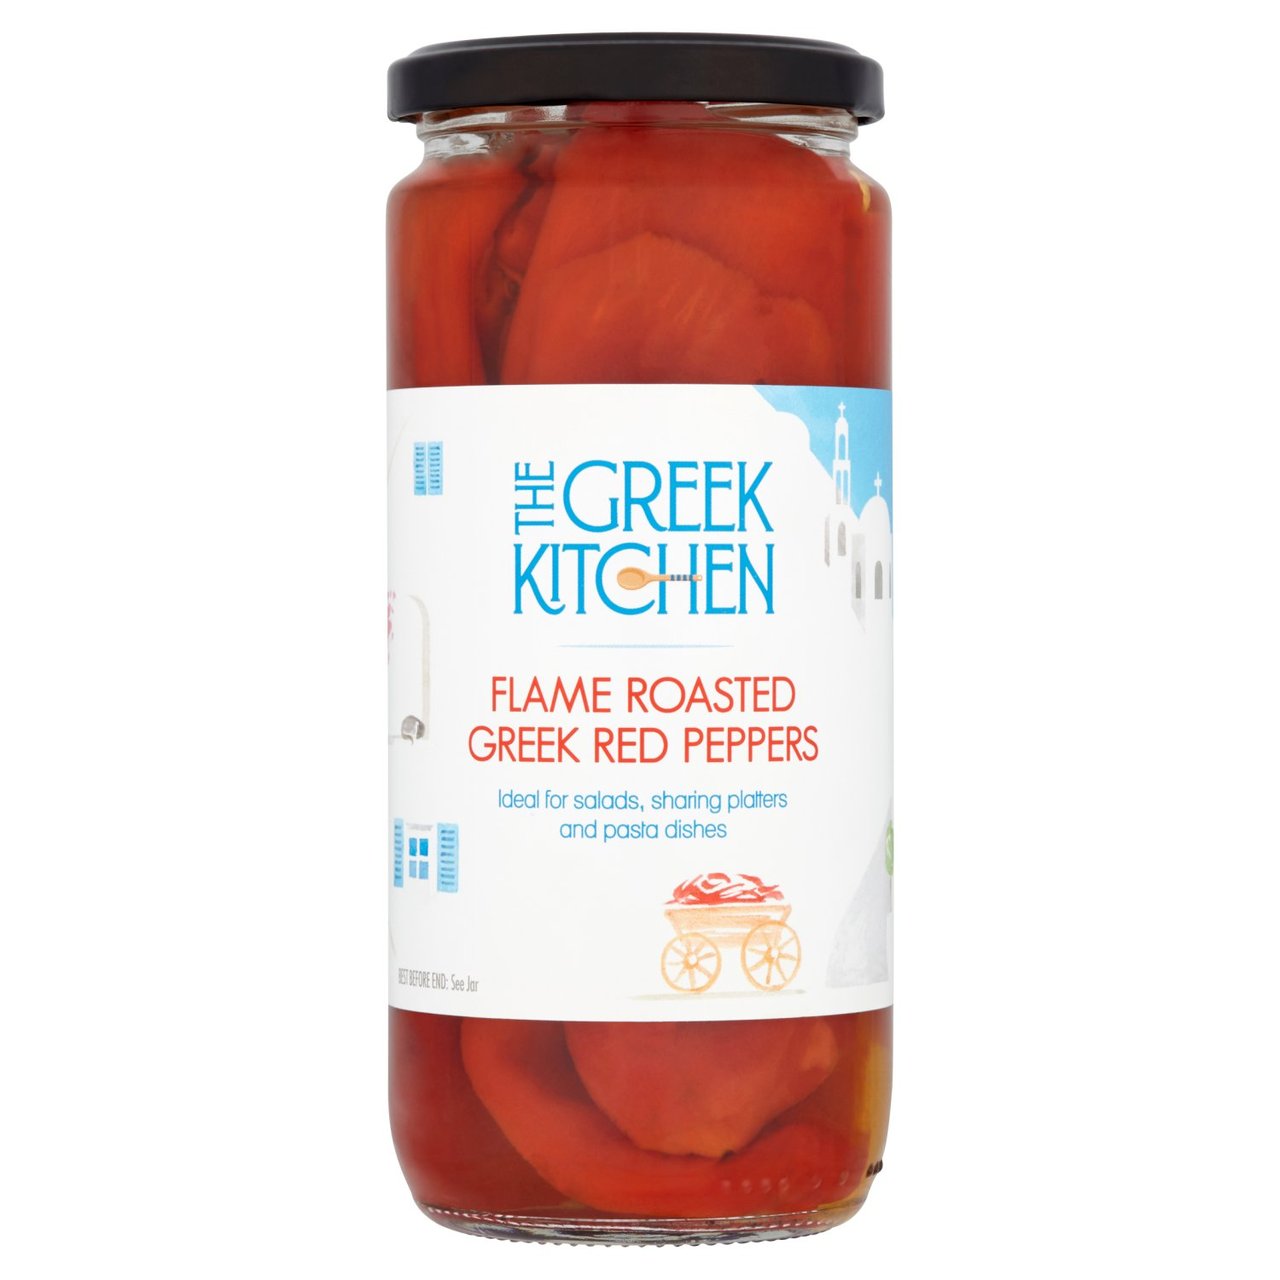 The Greek Kitchen Flame Roasted Red Peppers